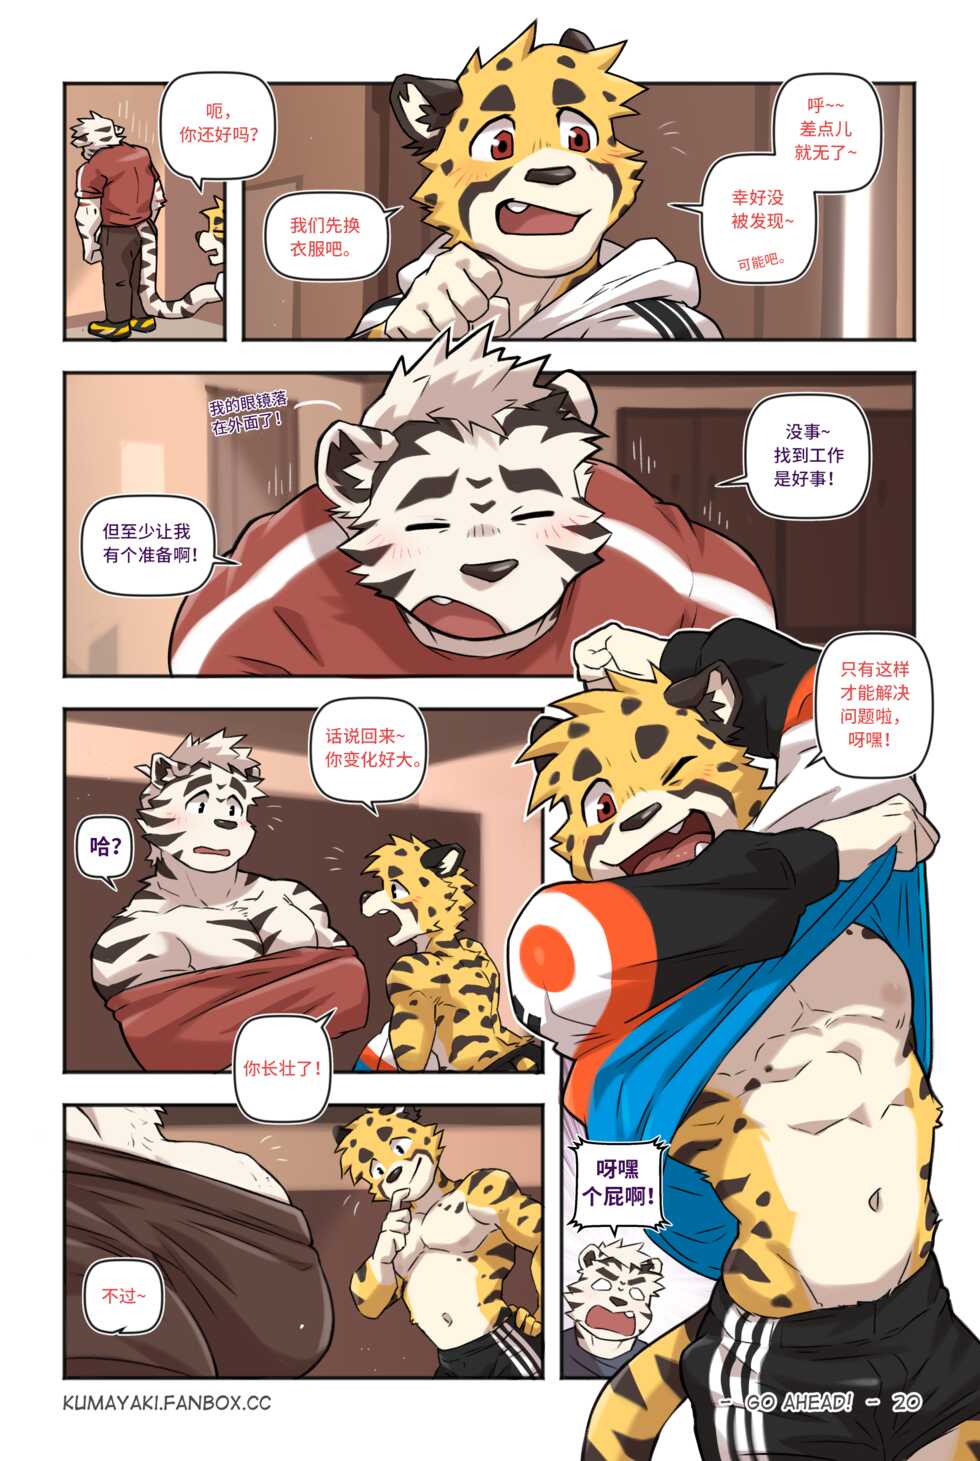 [KUMAK] Lucky Boys - Go Ahead! - (狗大汉化) [Simplified Chinese] [Ongoing] - Page 25